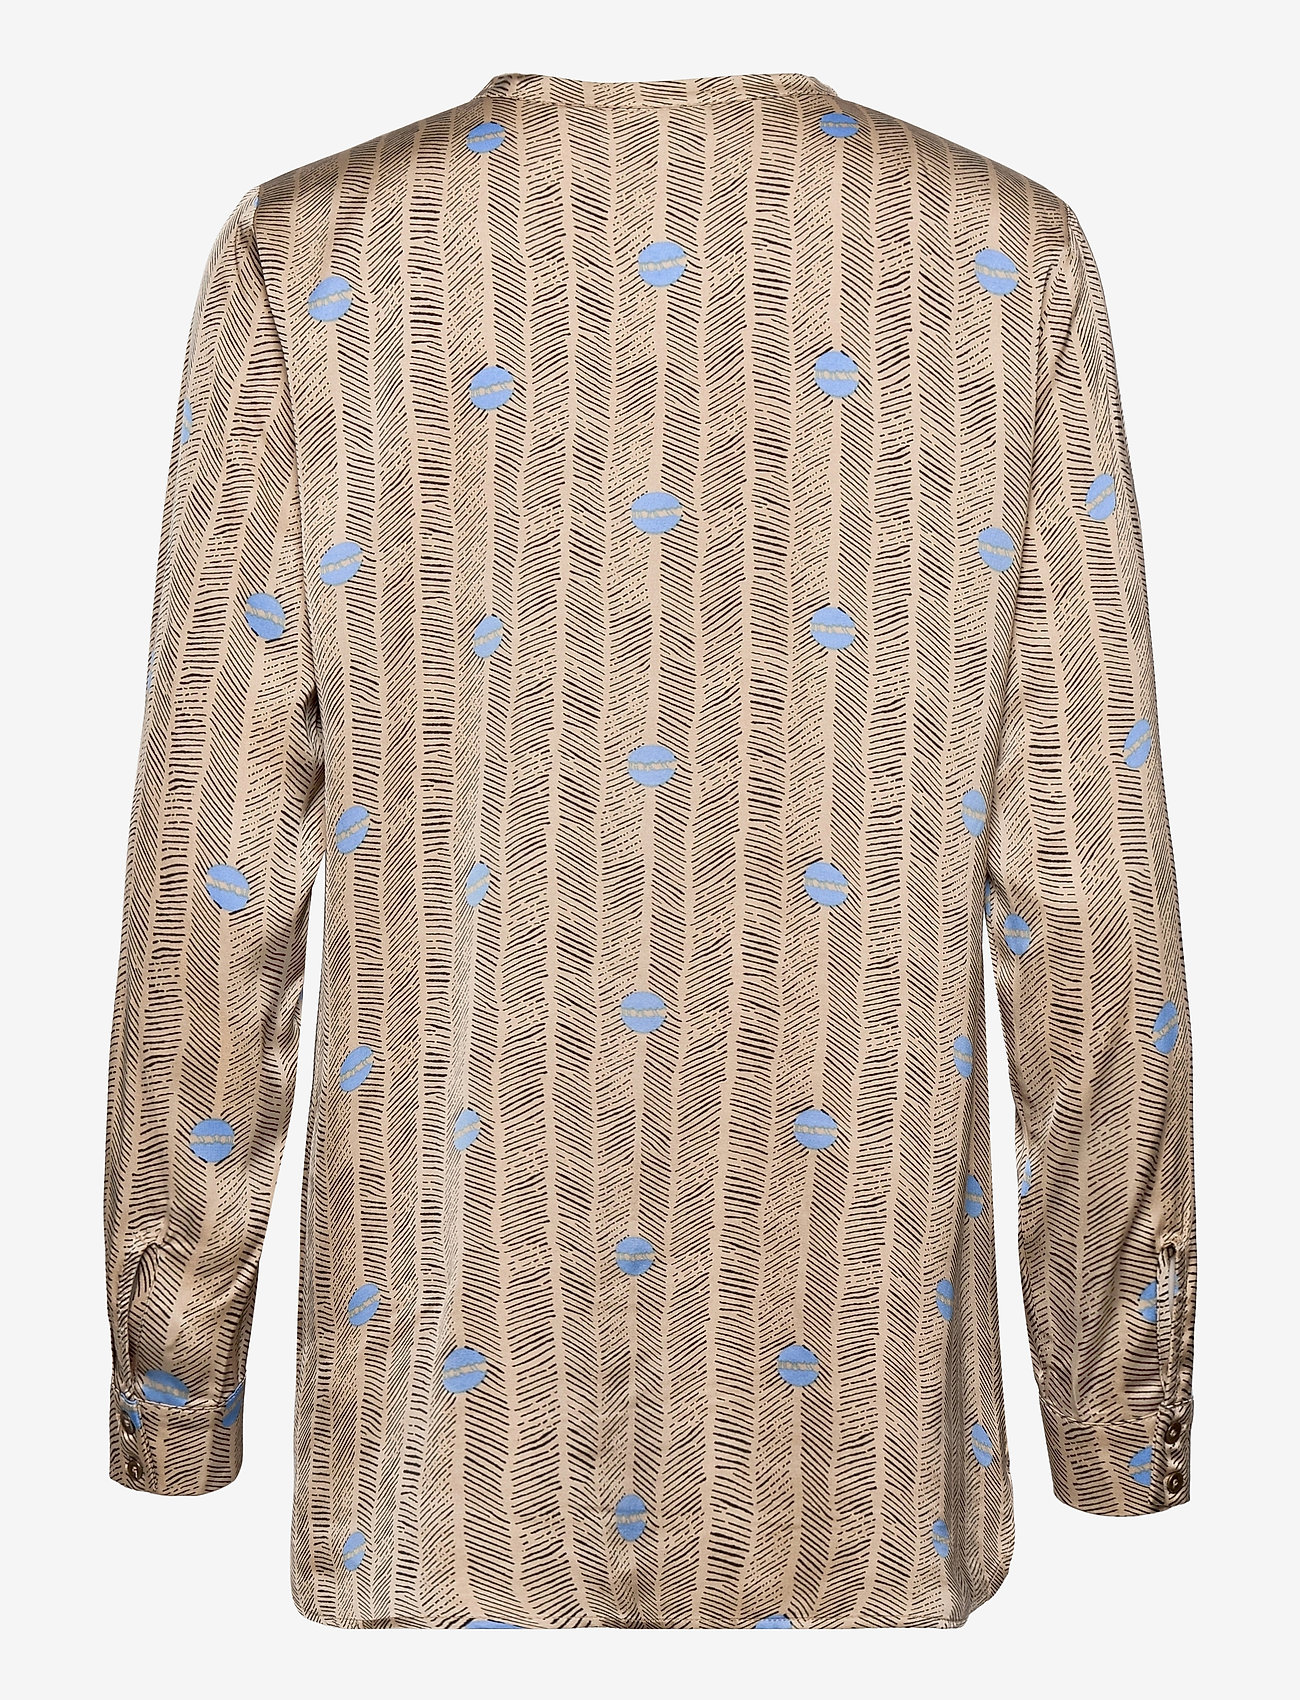 Coster Copenhagen - Shirt blouse in Sprout print - pitkähihaiset puserot - sprout print - sand - 1